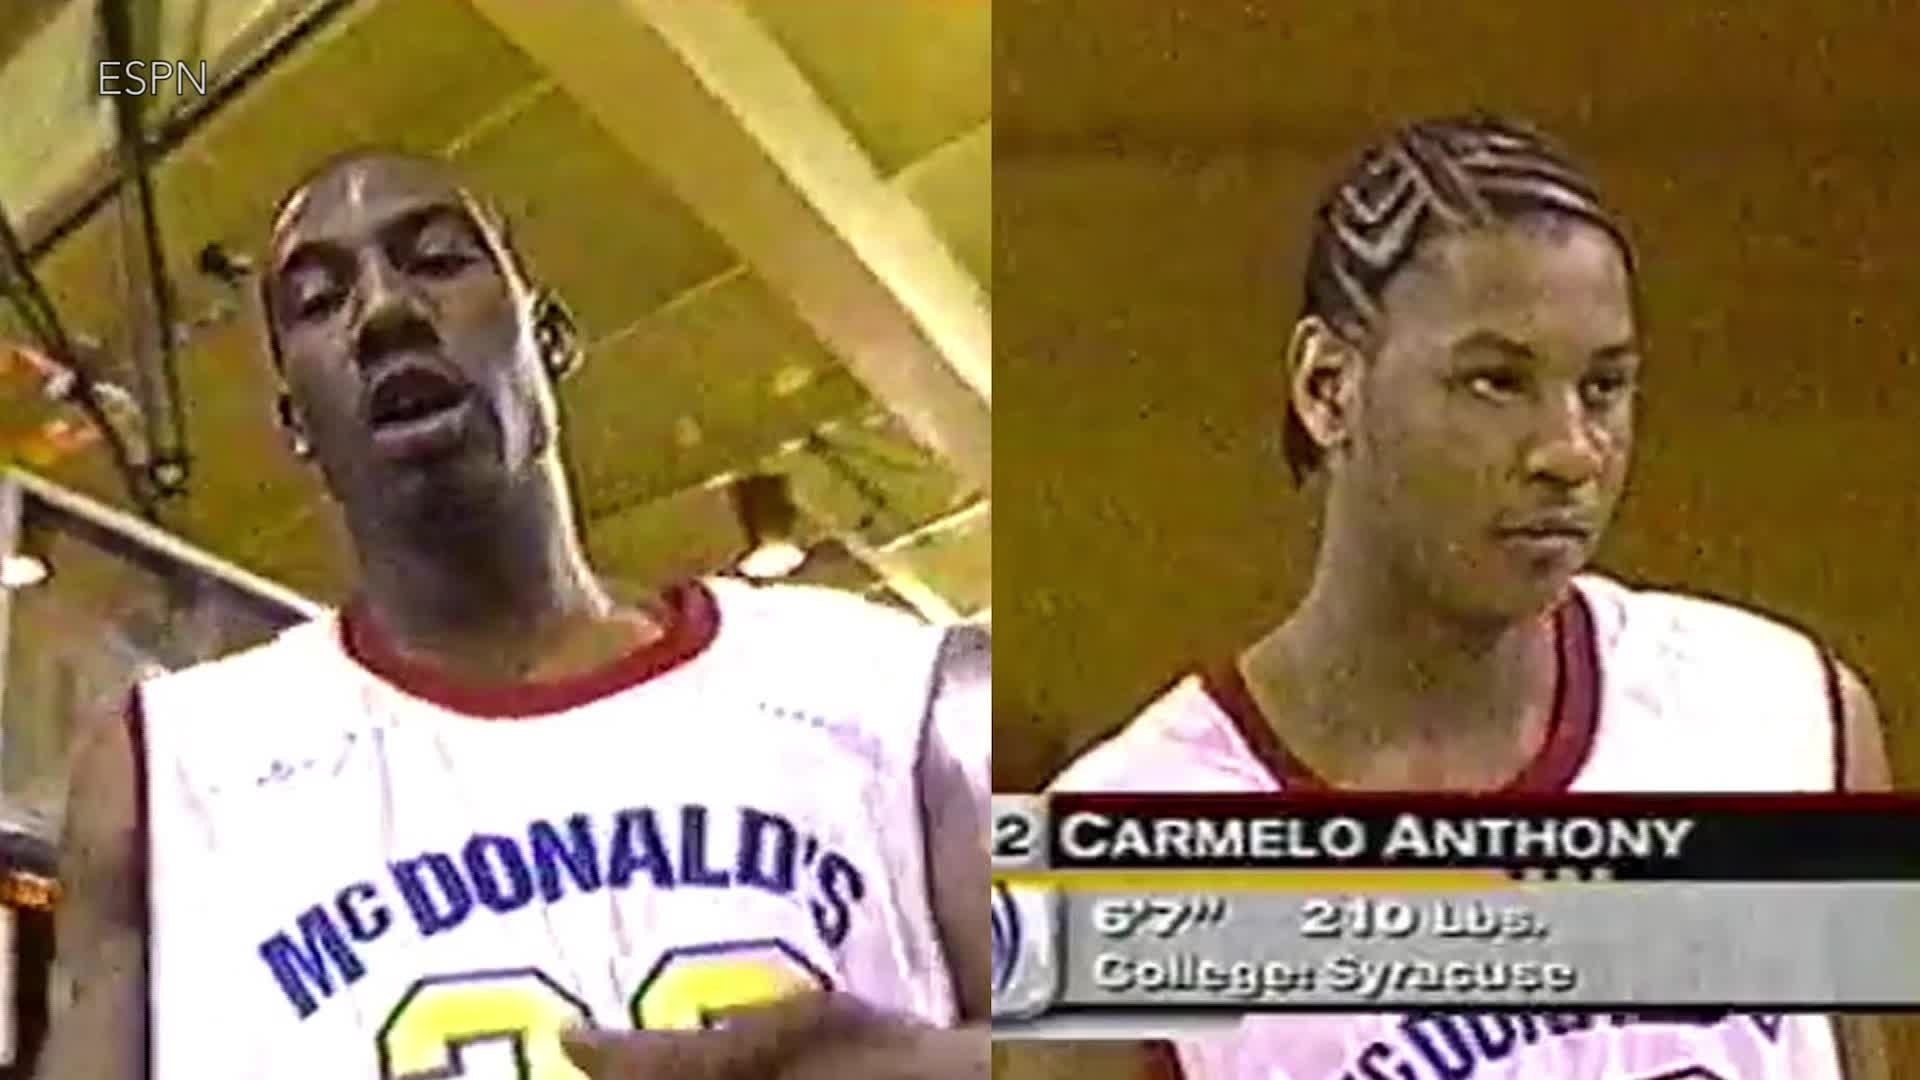 Carmelo Anthony Beats Amare Stoudemire in 2002 High School Dunk